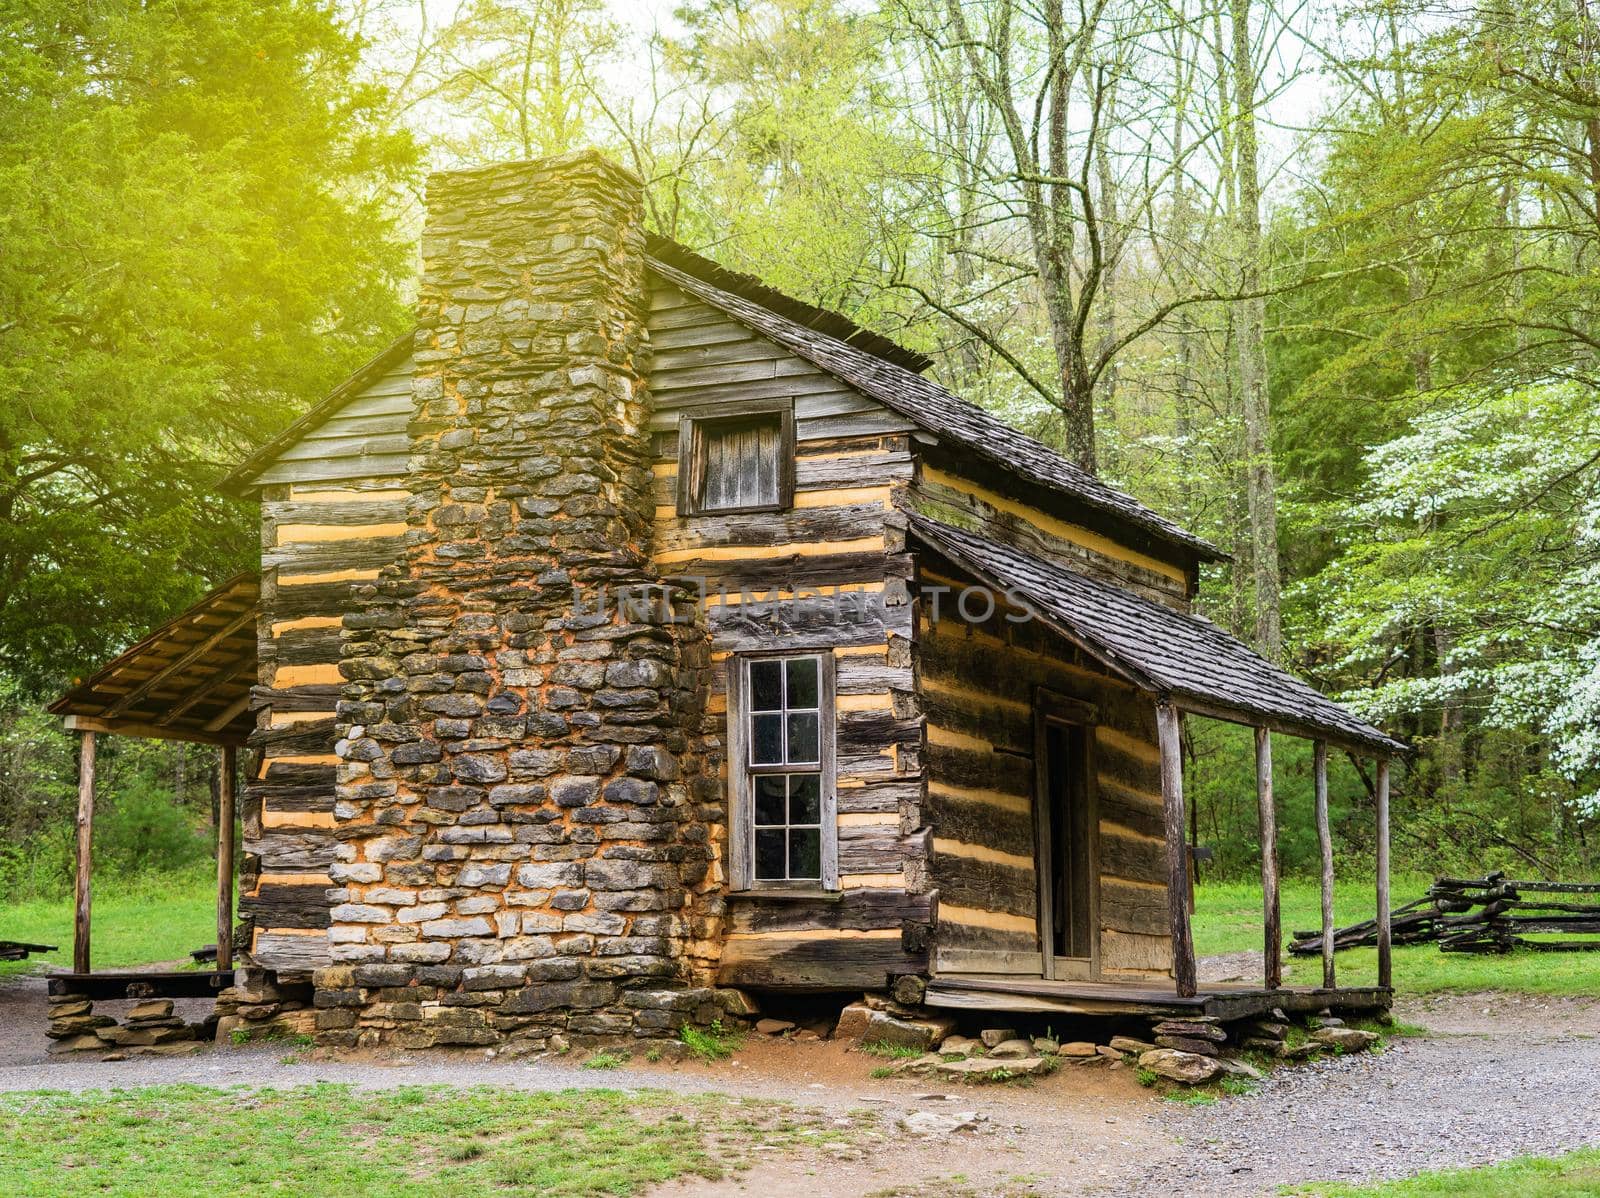 A lonely little cabin in the woods, lonely little log cabin in the green forest by isaiphoto